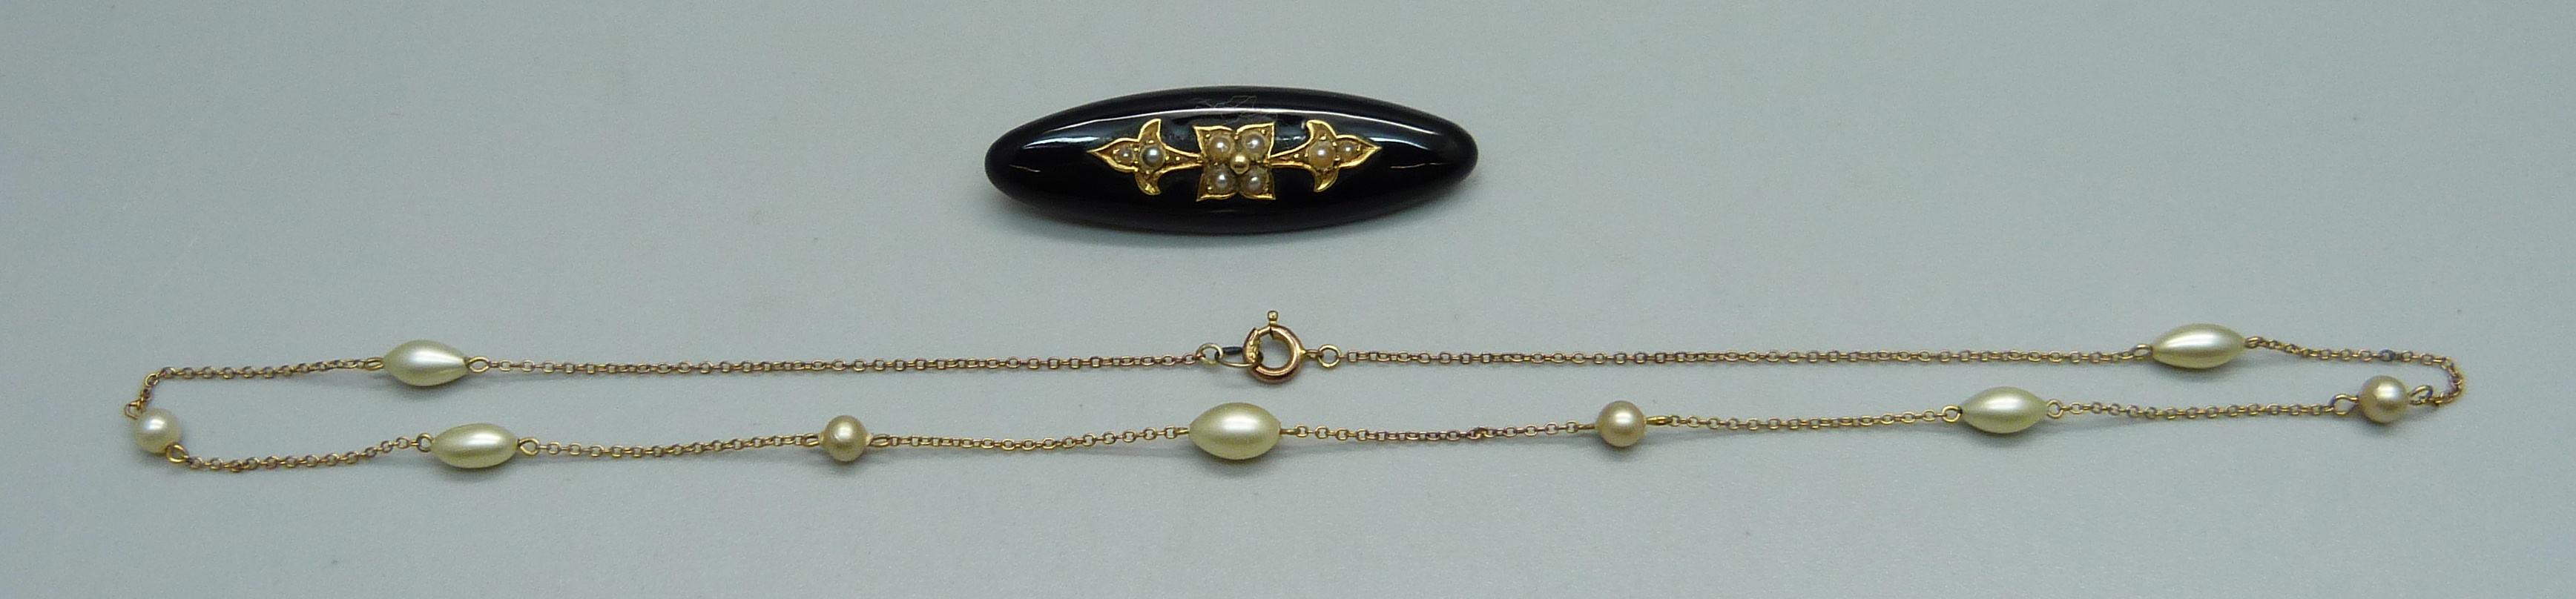 A Victorian mourning brooch set with seed pearls and a fine 9ct gold and pearl necklace, (very small